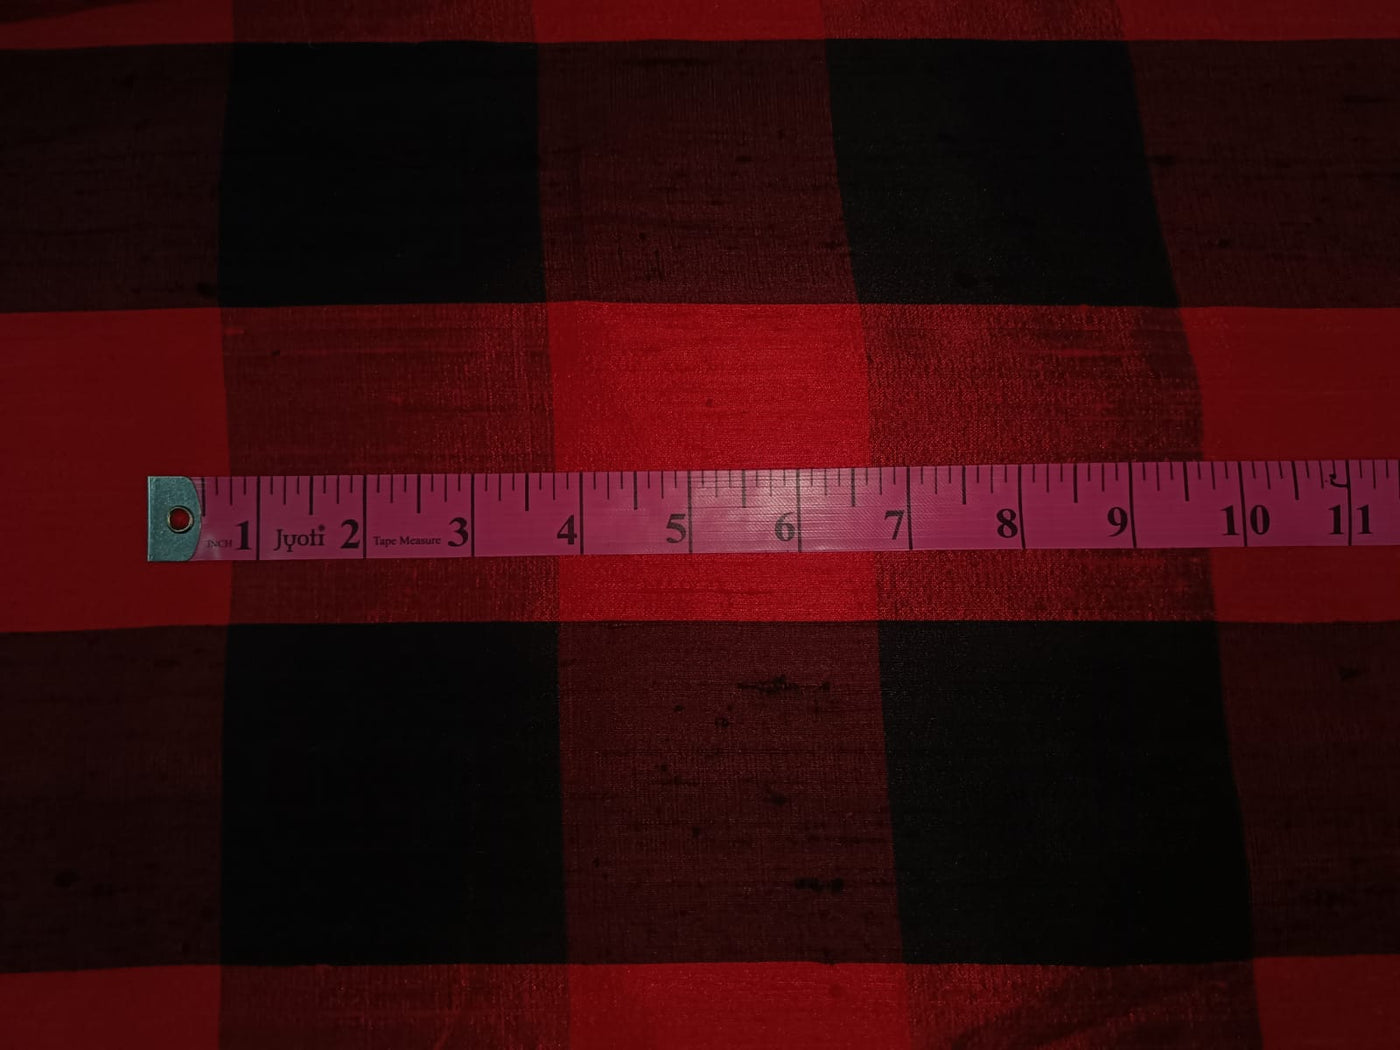 100% PURE SILK DUPION FABRIC RED WINE AND BLACK Color PLAIDS 54" wide DUPC116 [9774]